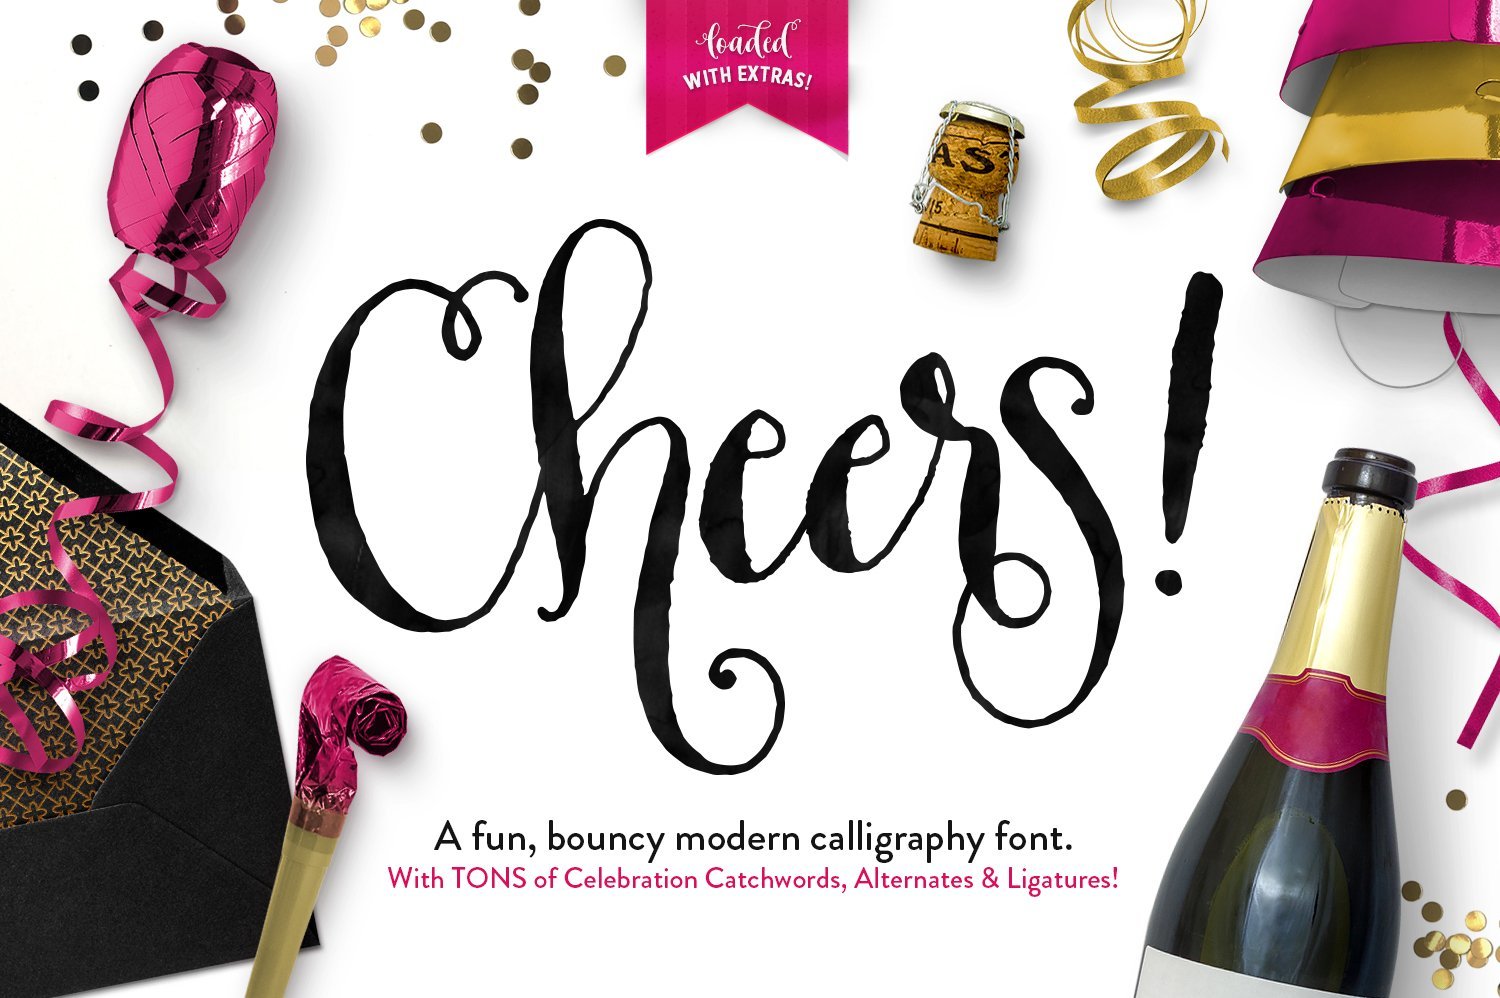 Download Callie's Font "Cheers" here" http://crtv.mk/d0Ygl